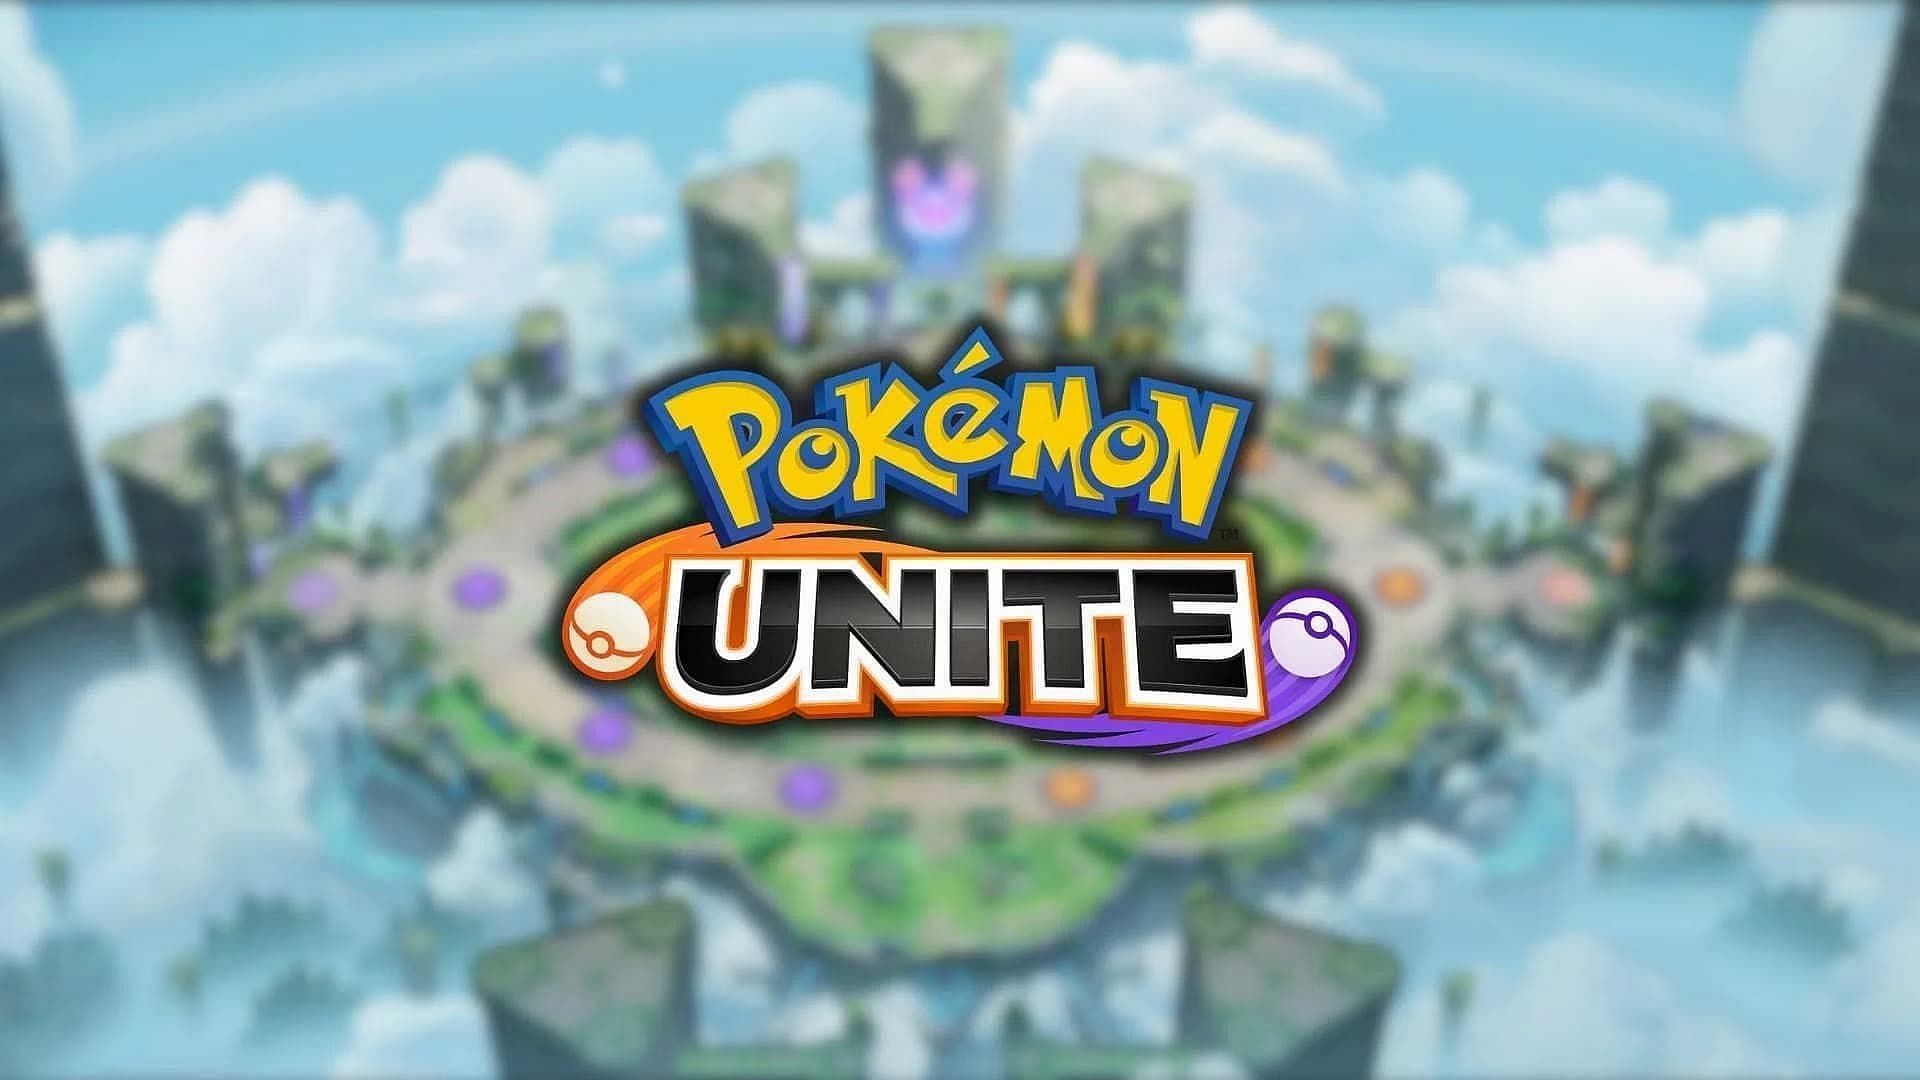 Pokemon Unite update v1.14.1.5 patch notes: Falinks announced, Mewtwo Y nerfs, and more